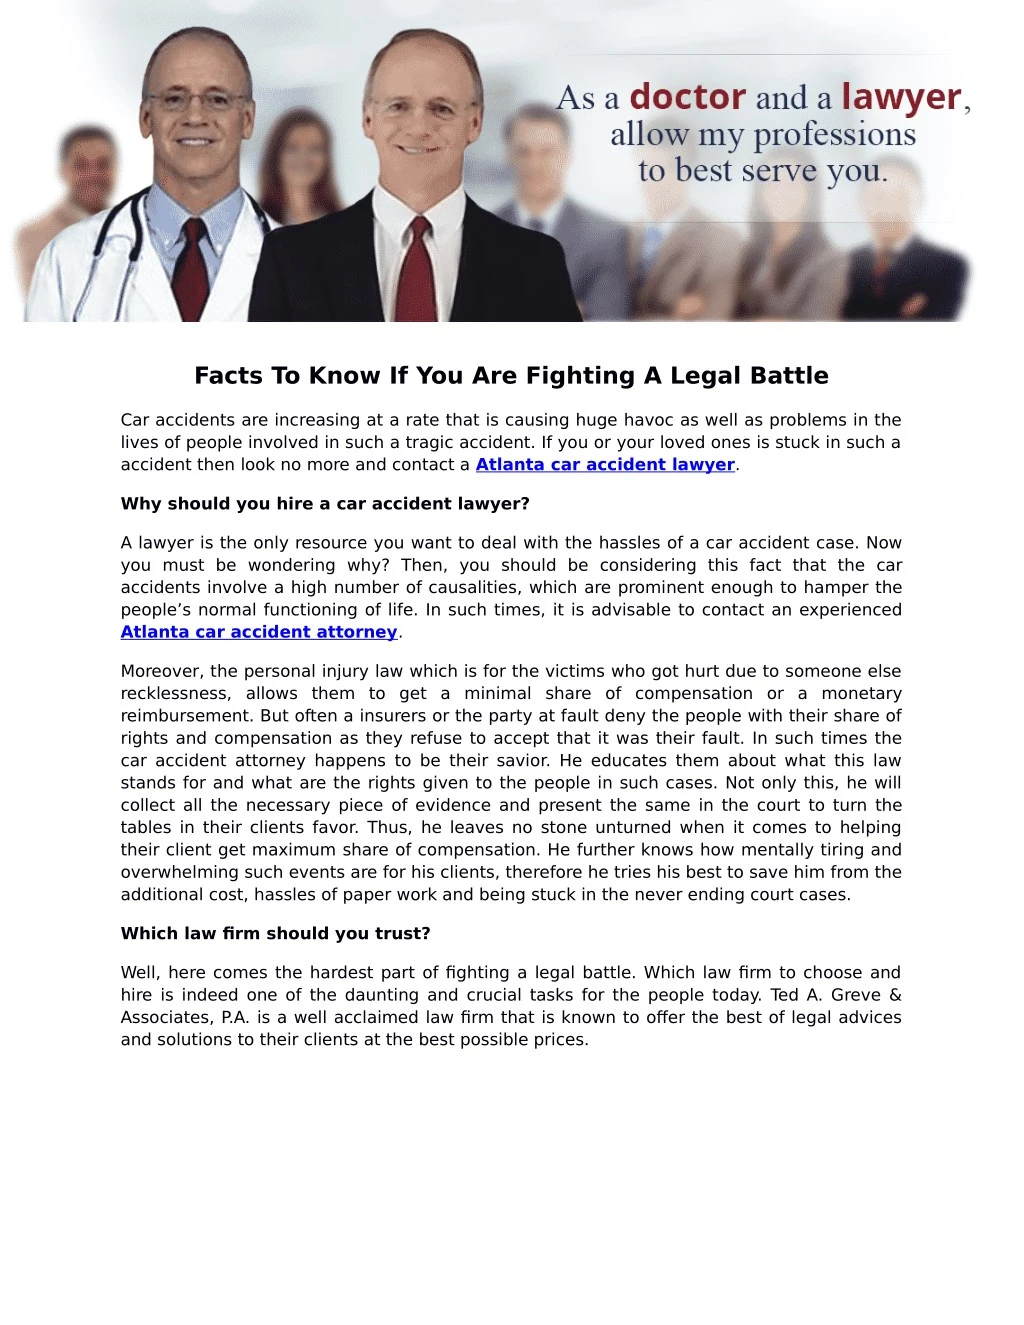 facts to know if you are fighting a legal battle